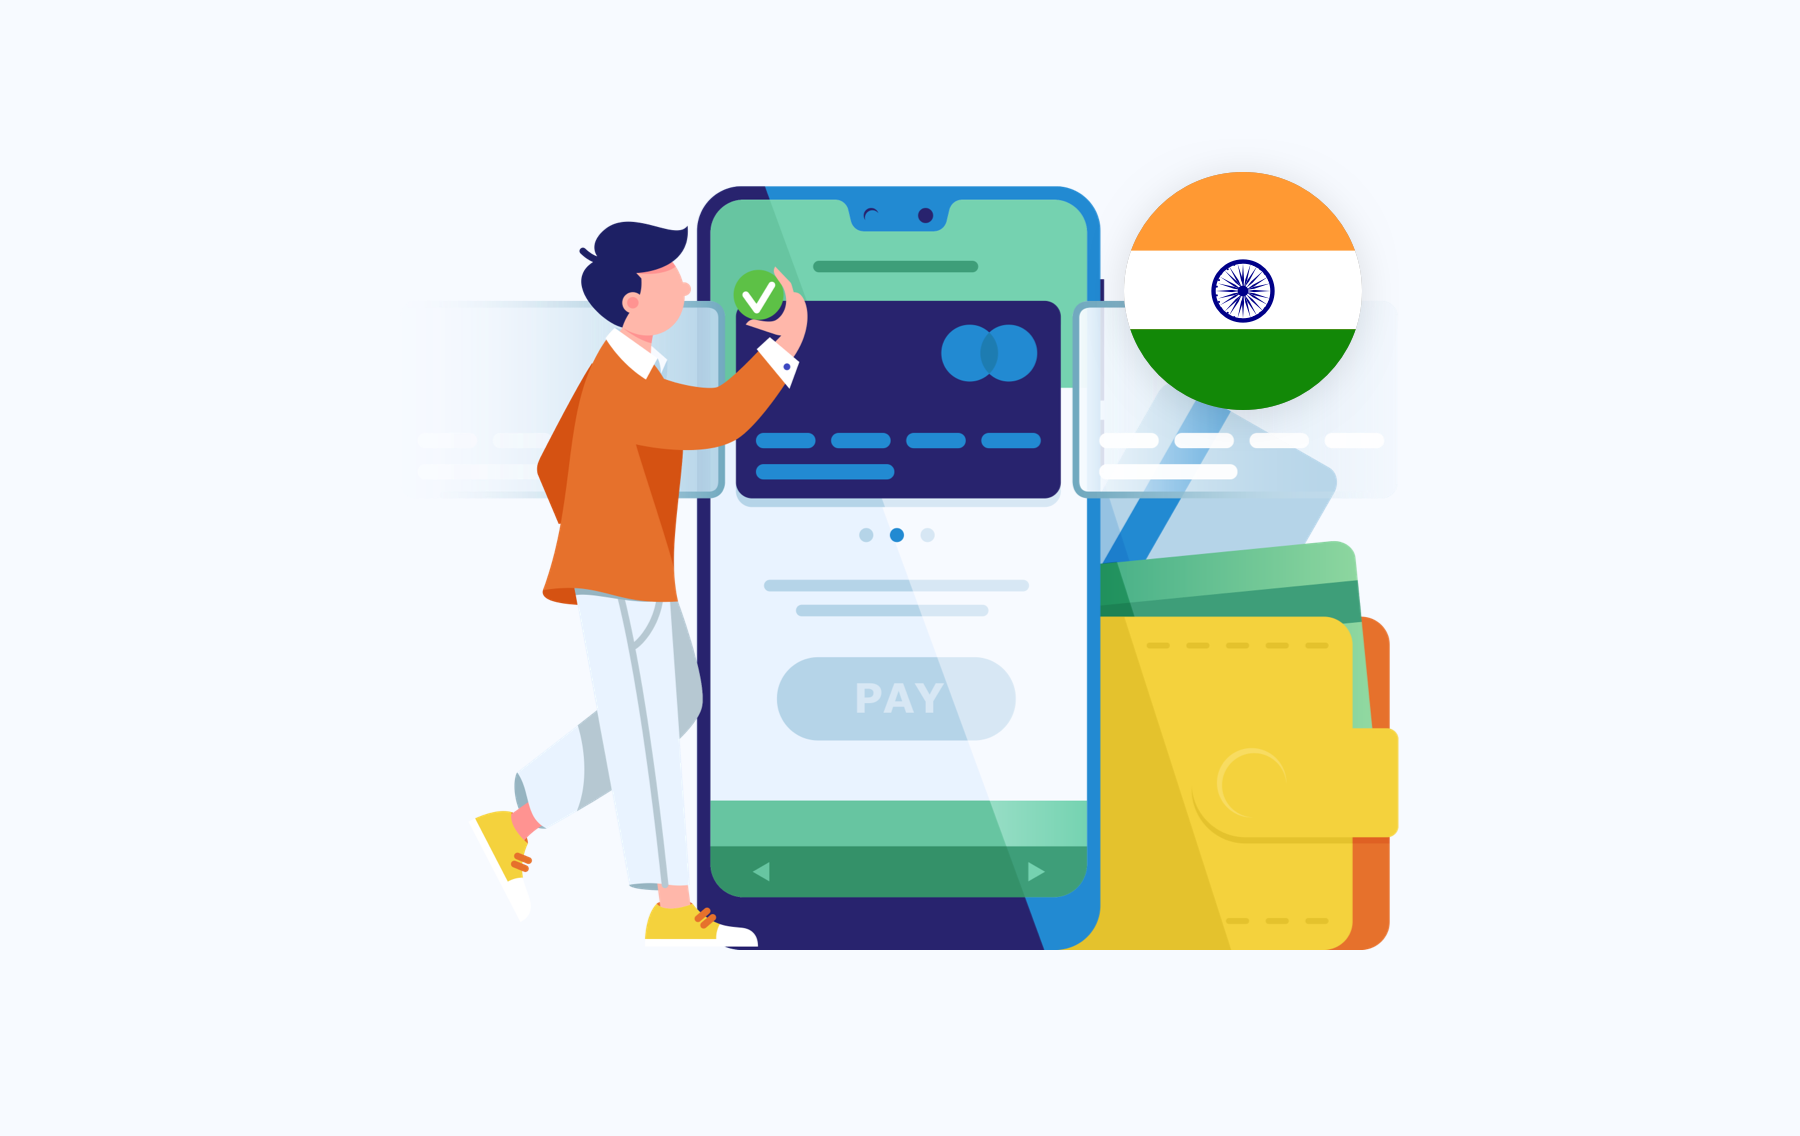 indians prefer shopping with digital wallets